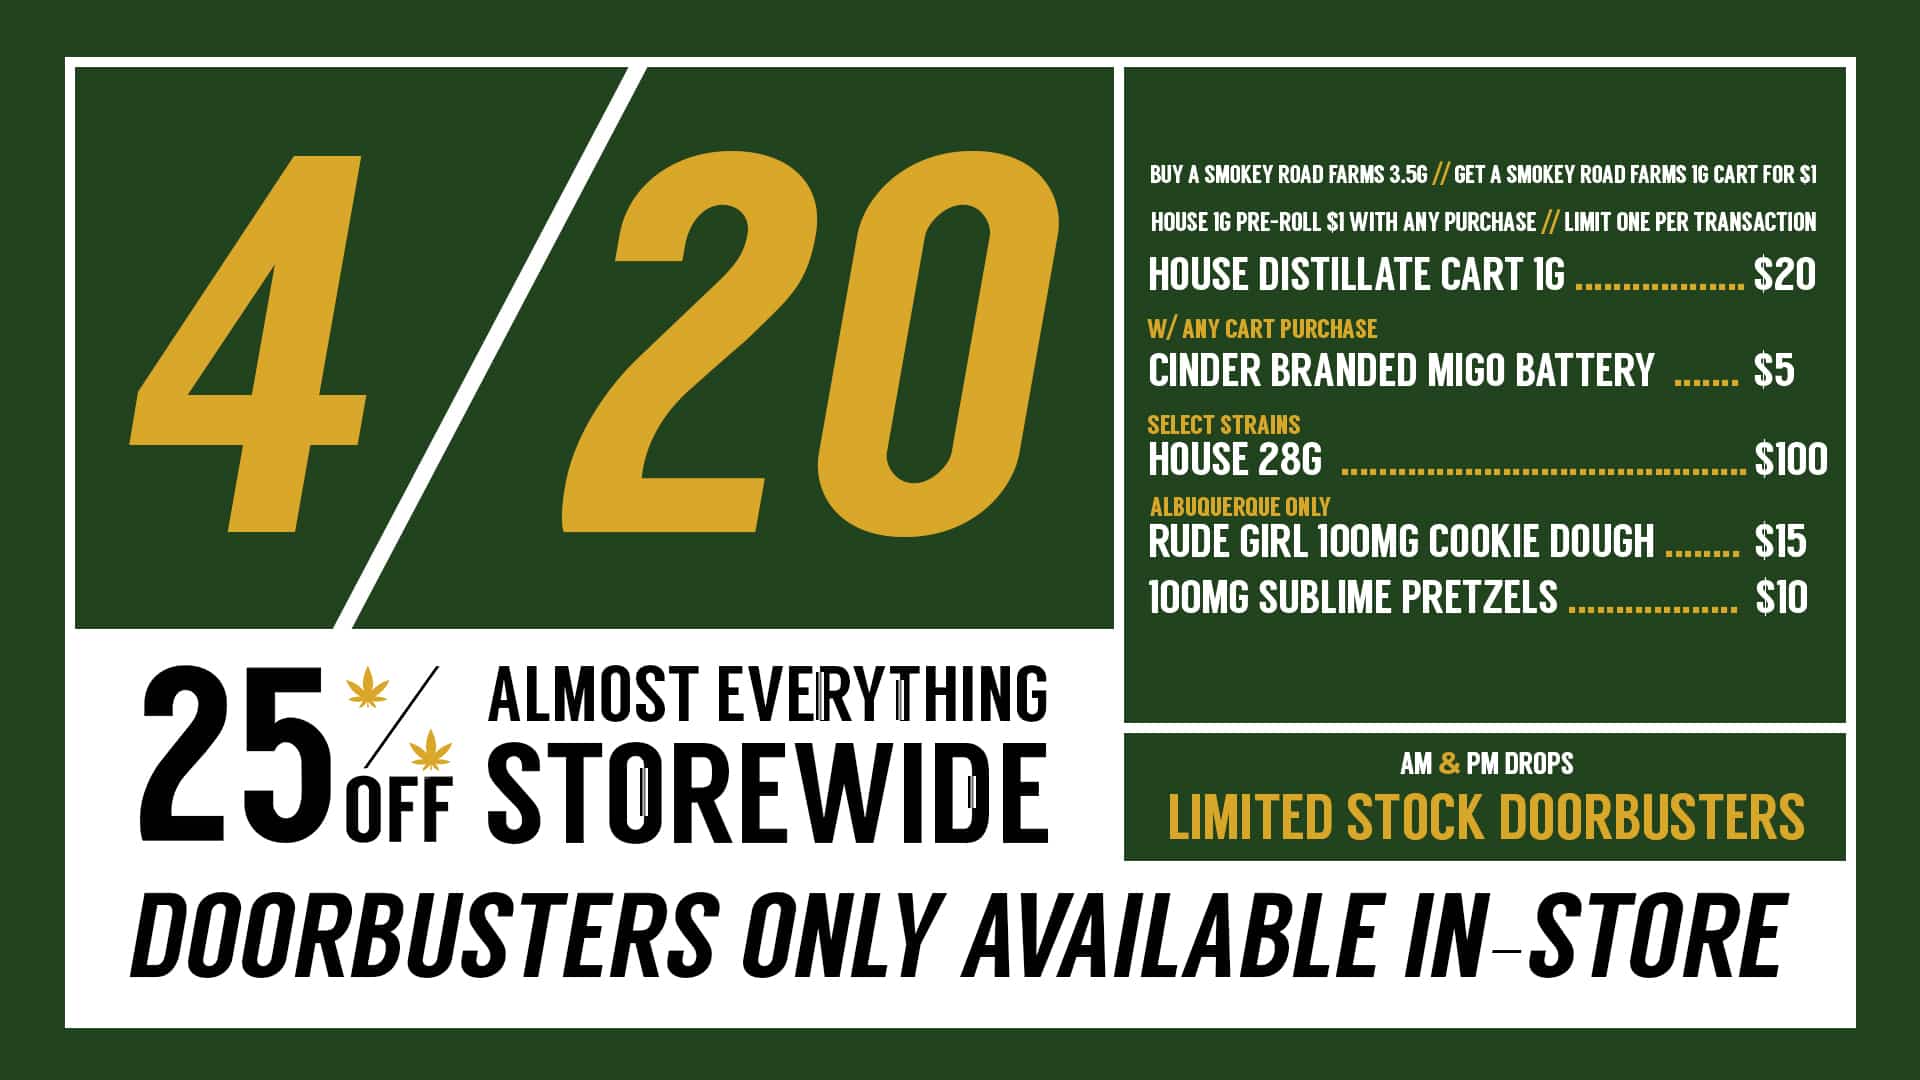 420 Storewide New Mexico Cannabis Sale and Doorbusters